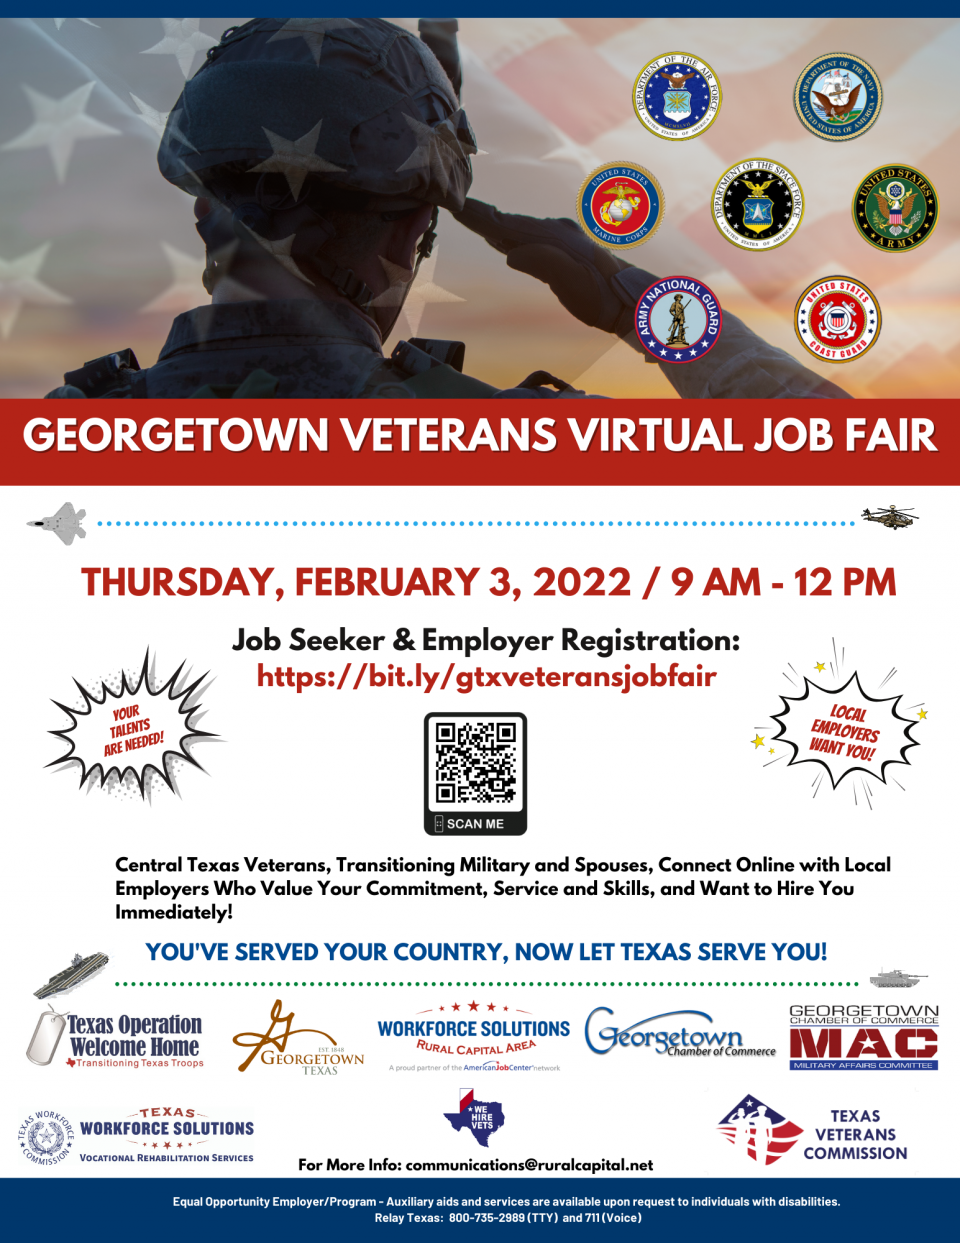 Local Employers Want You!: Don't Miss the Georgetown Veterans Virtual Job Fair on Feb 3